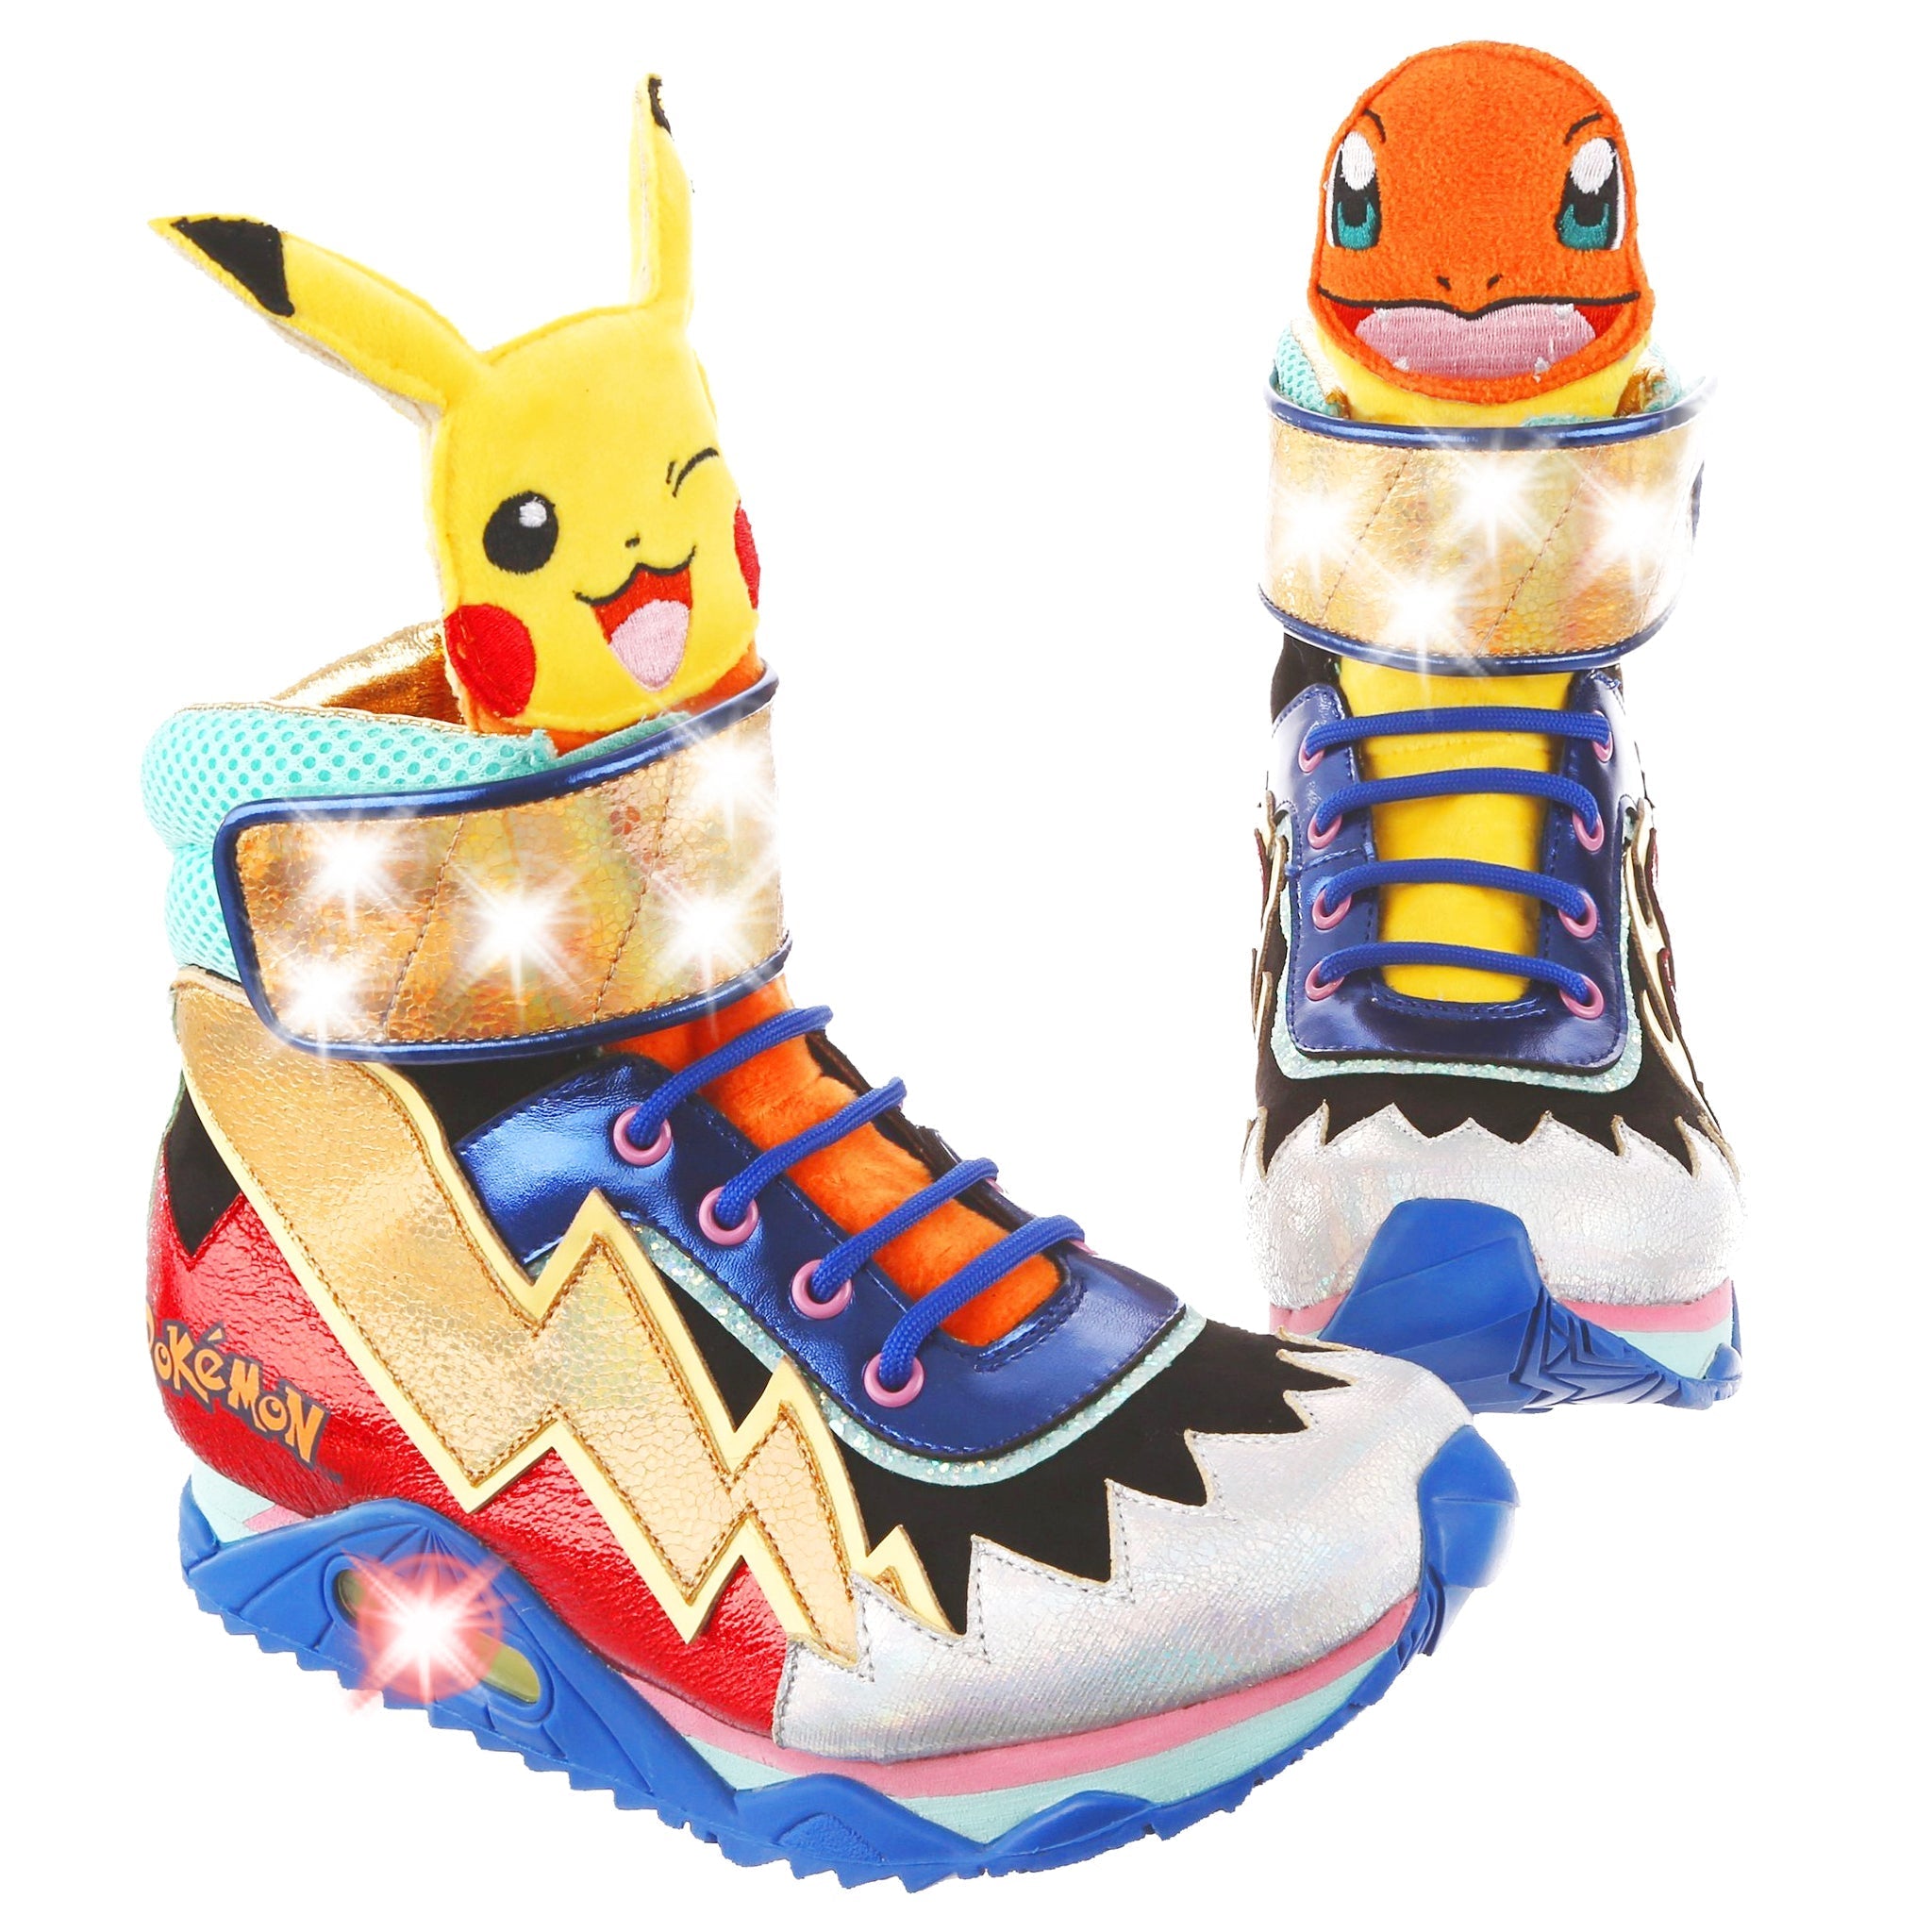 Red, blue, black and silver trainers have a gold lightening strike down the outside and matching gold ankle strap that fastens with velcro, sitting above these is Pikachu's smiling face on the right foot and Charmander looking happy on the left. The ankle strap has white LED lights that flash as you walk, the sole also contains a motion sensored light that flashes red, blue and green.